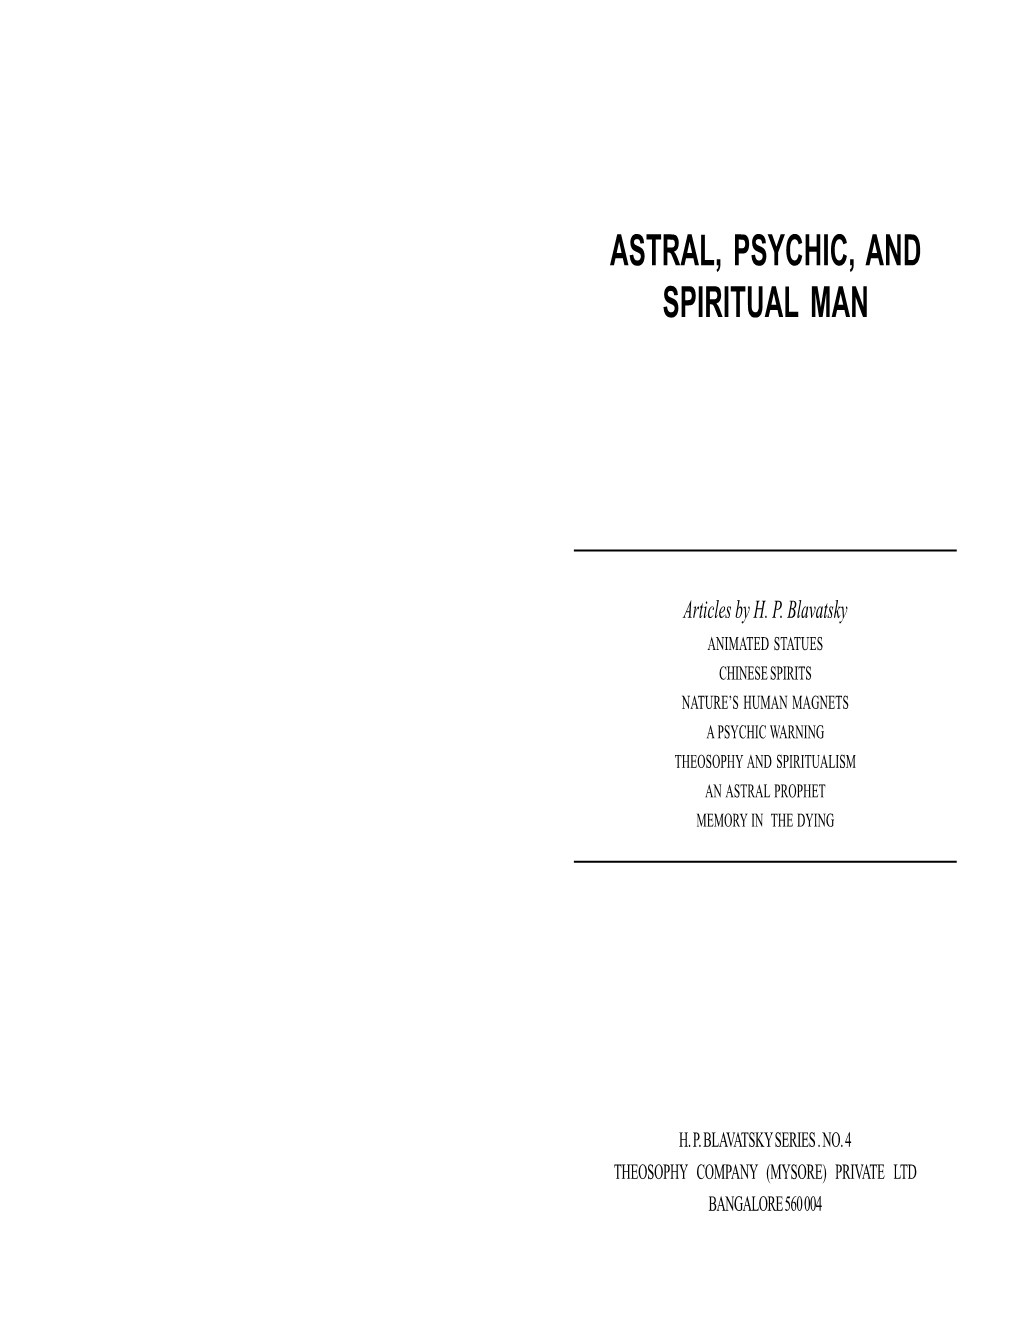 Astral, Psychic, and Spiritual Man